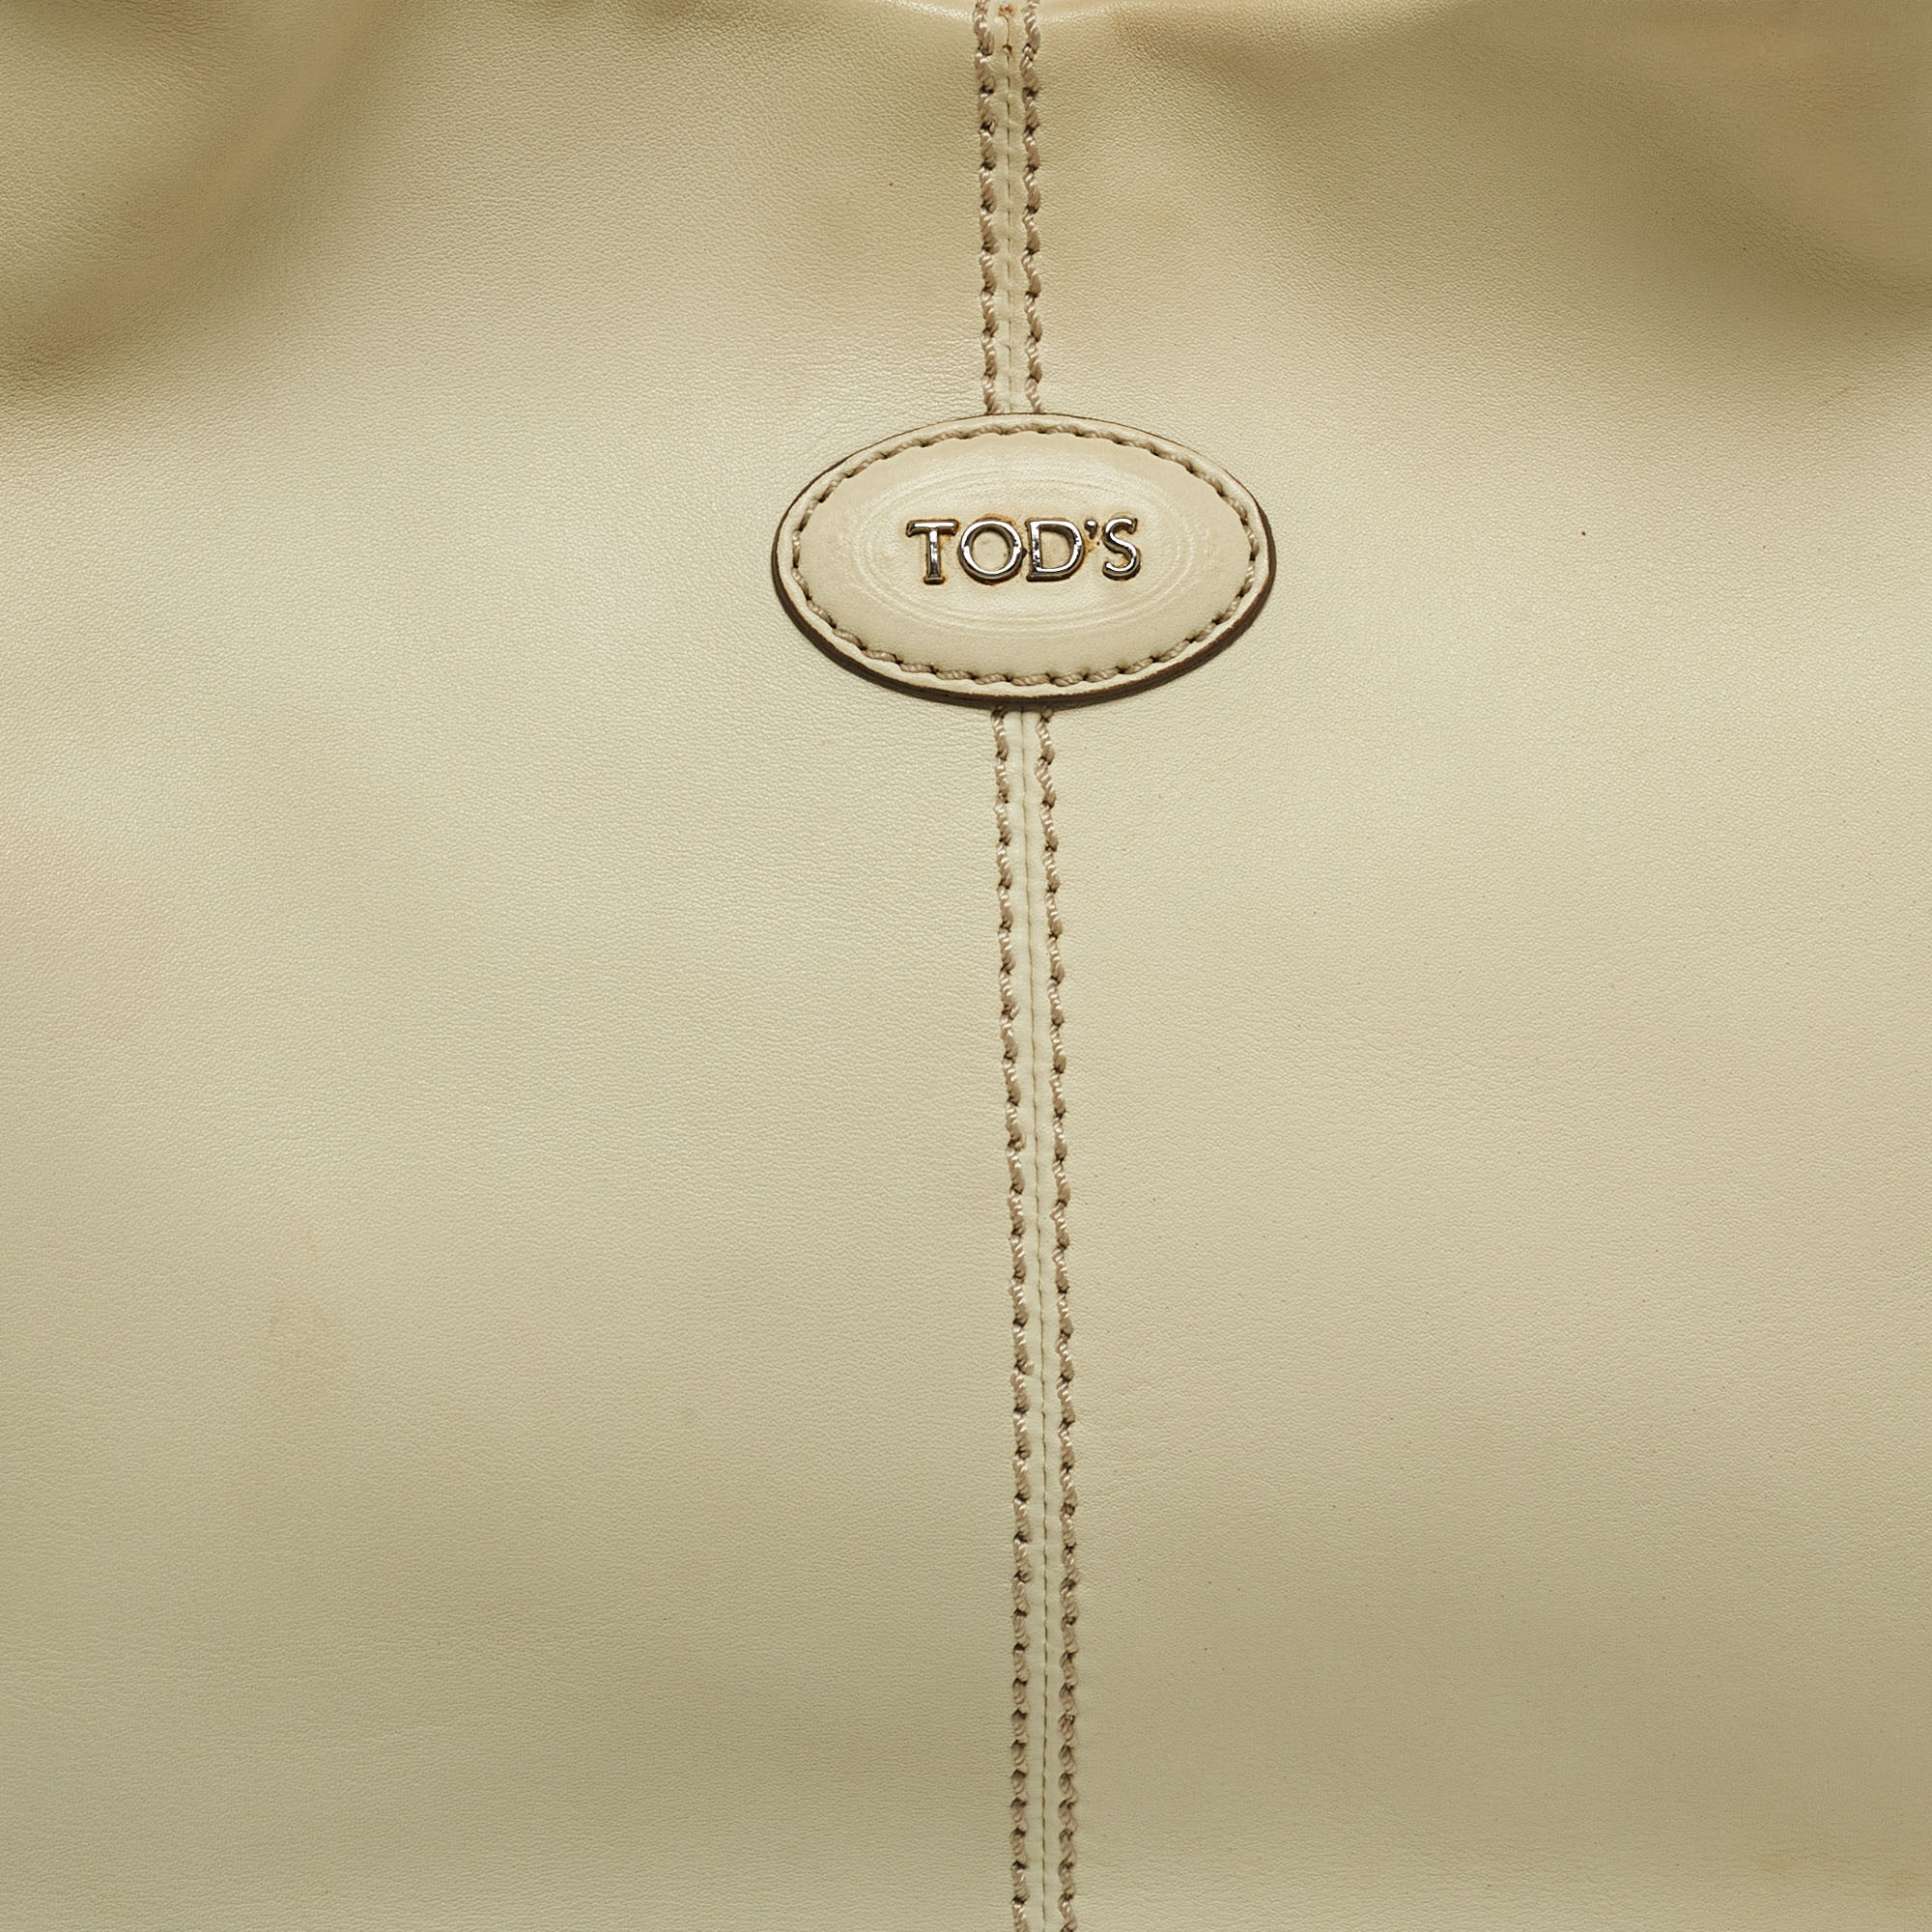 Tod's Cream Leather Tote